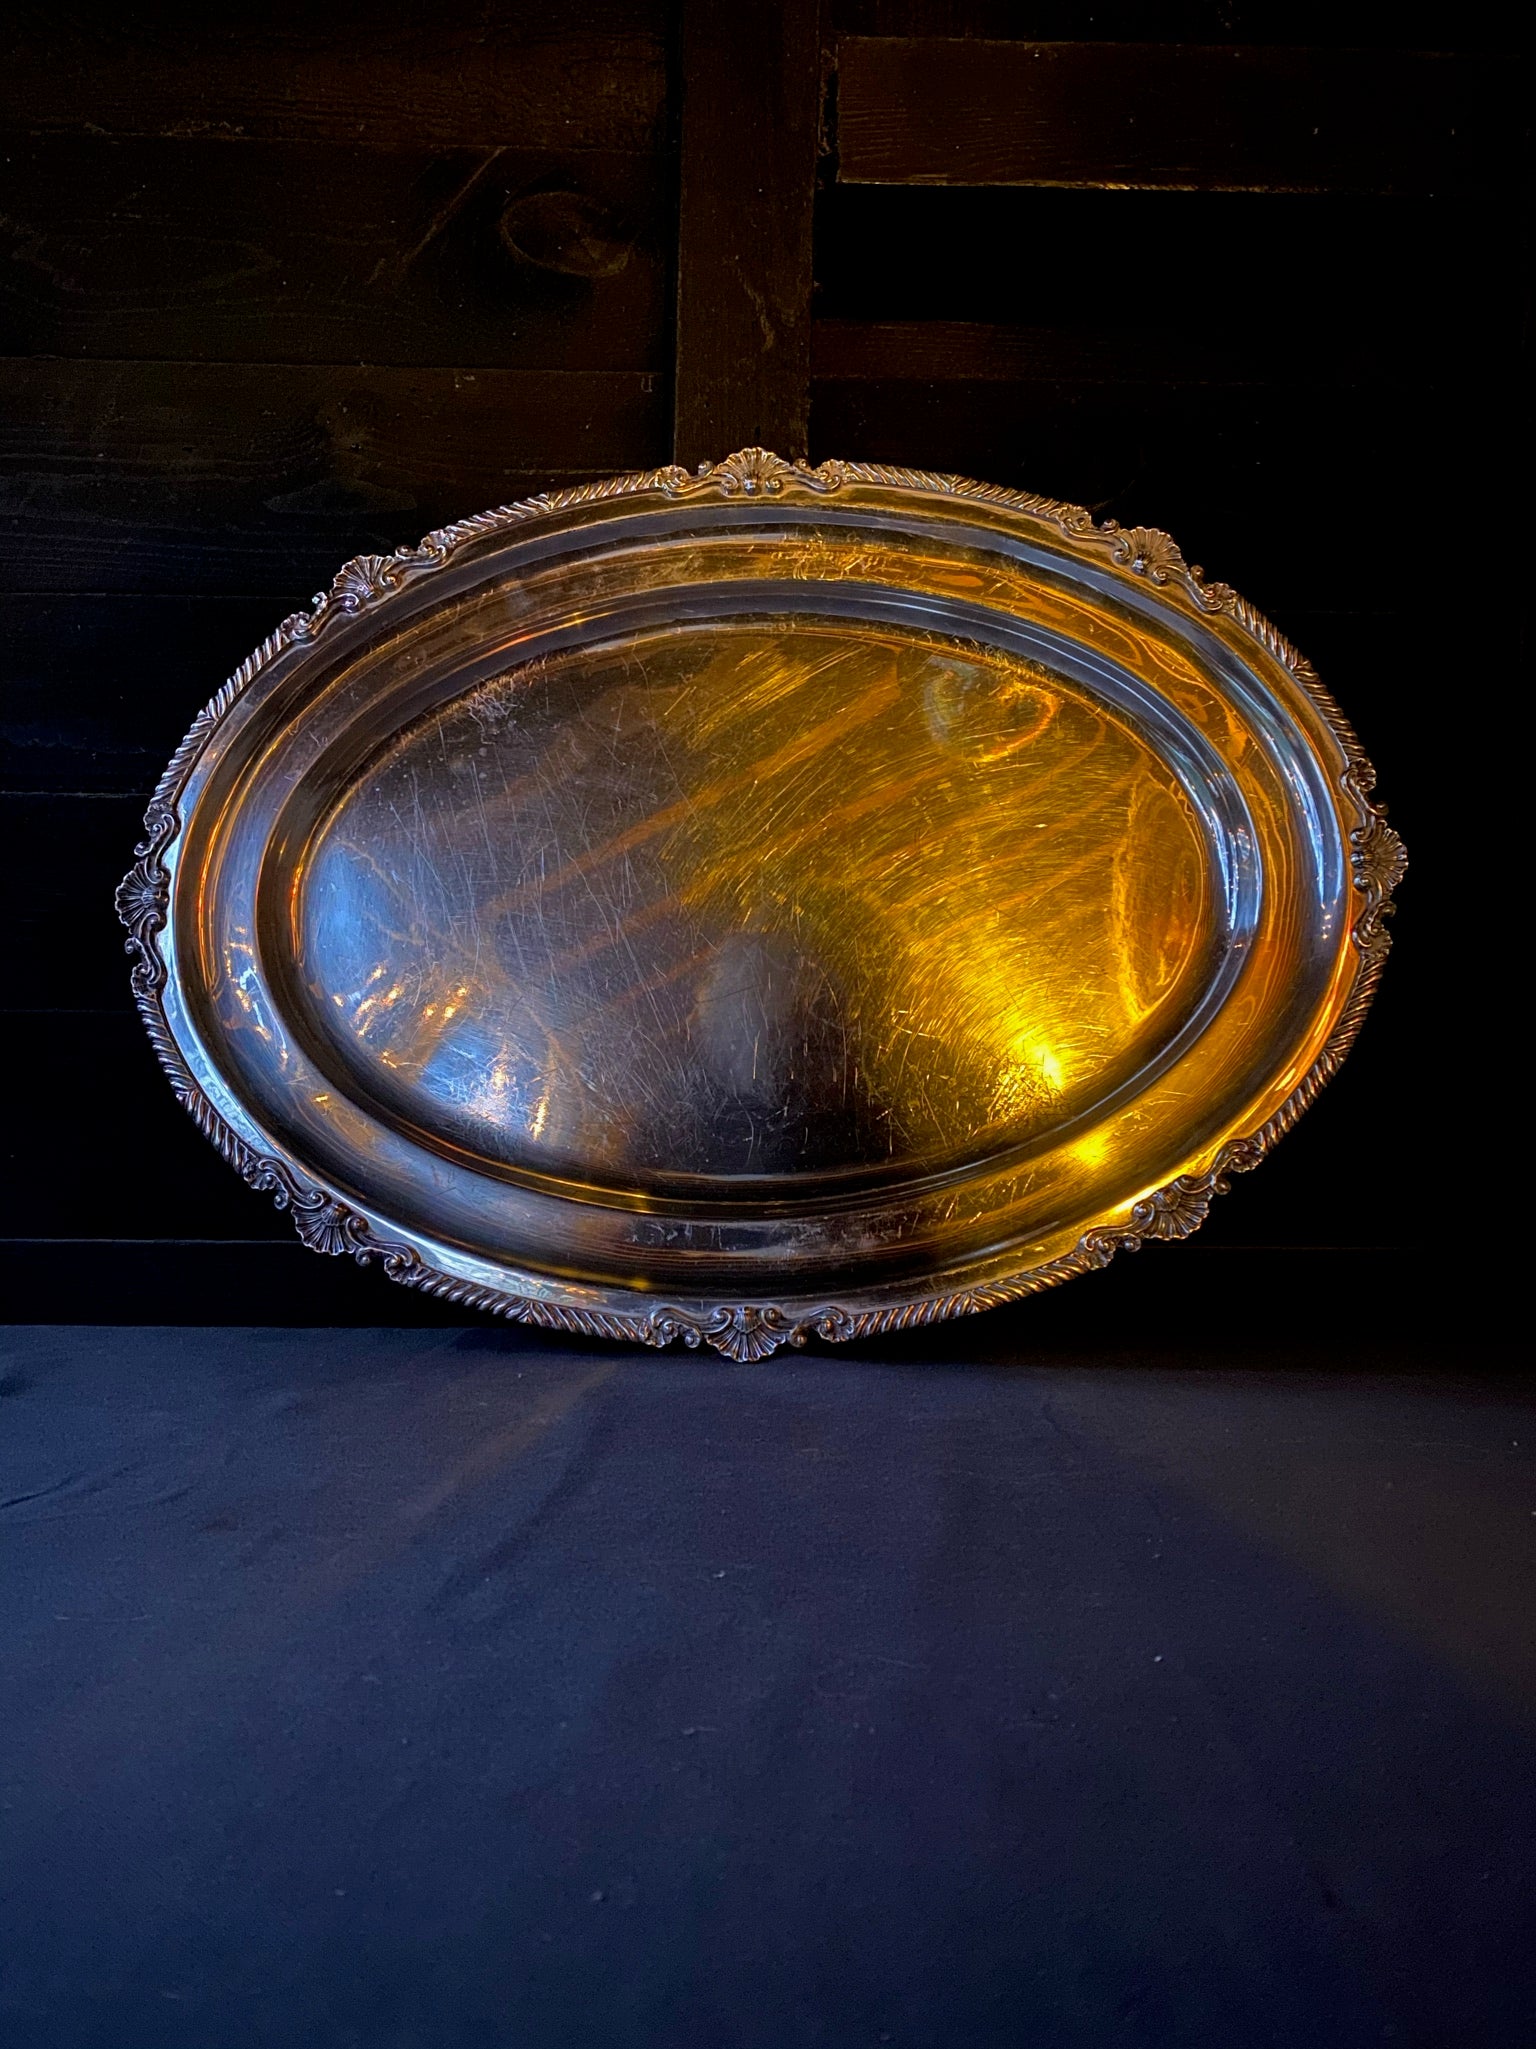 Large Silver Plated Ornate Oval Tray